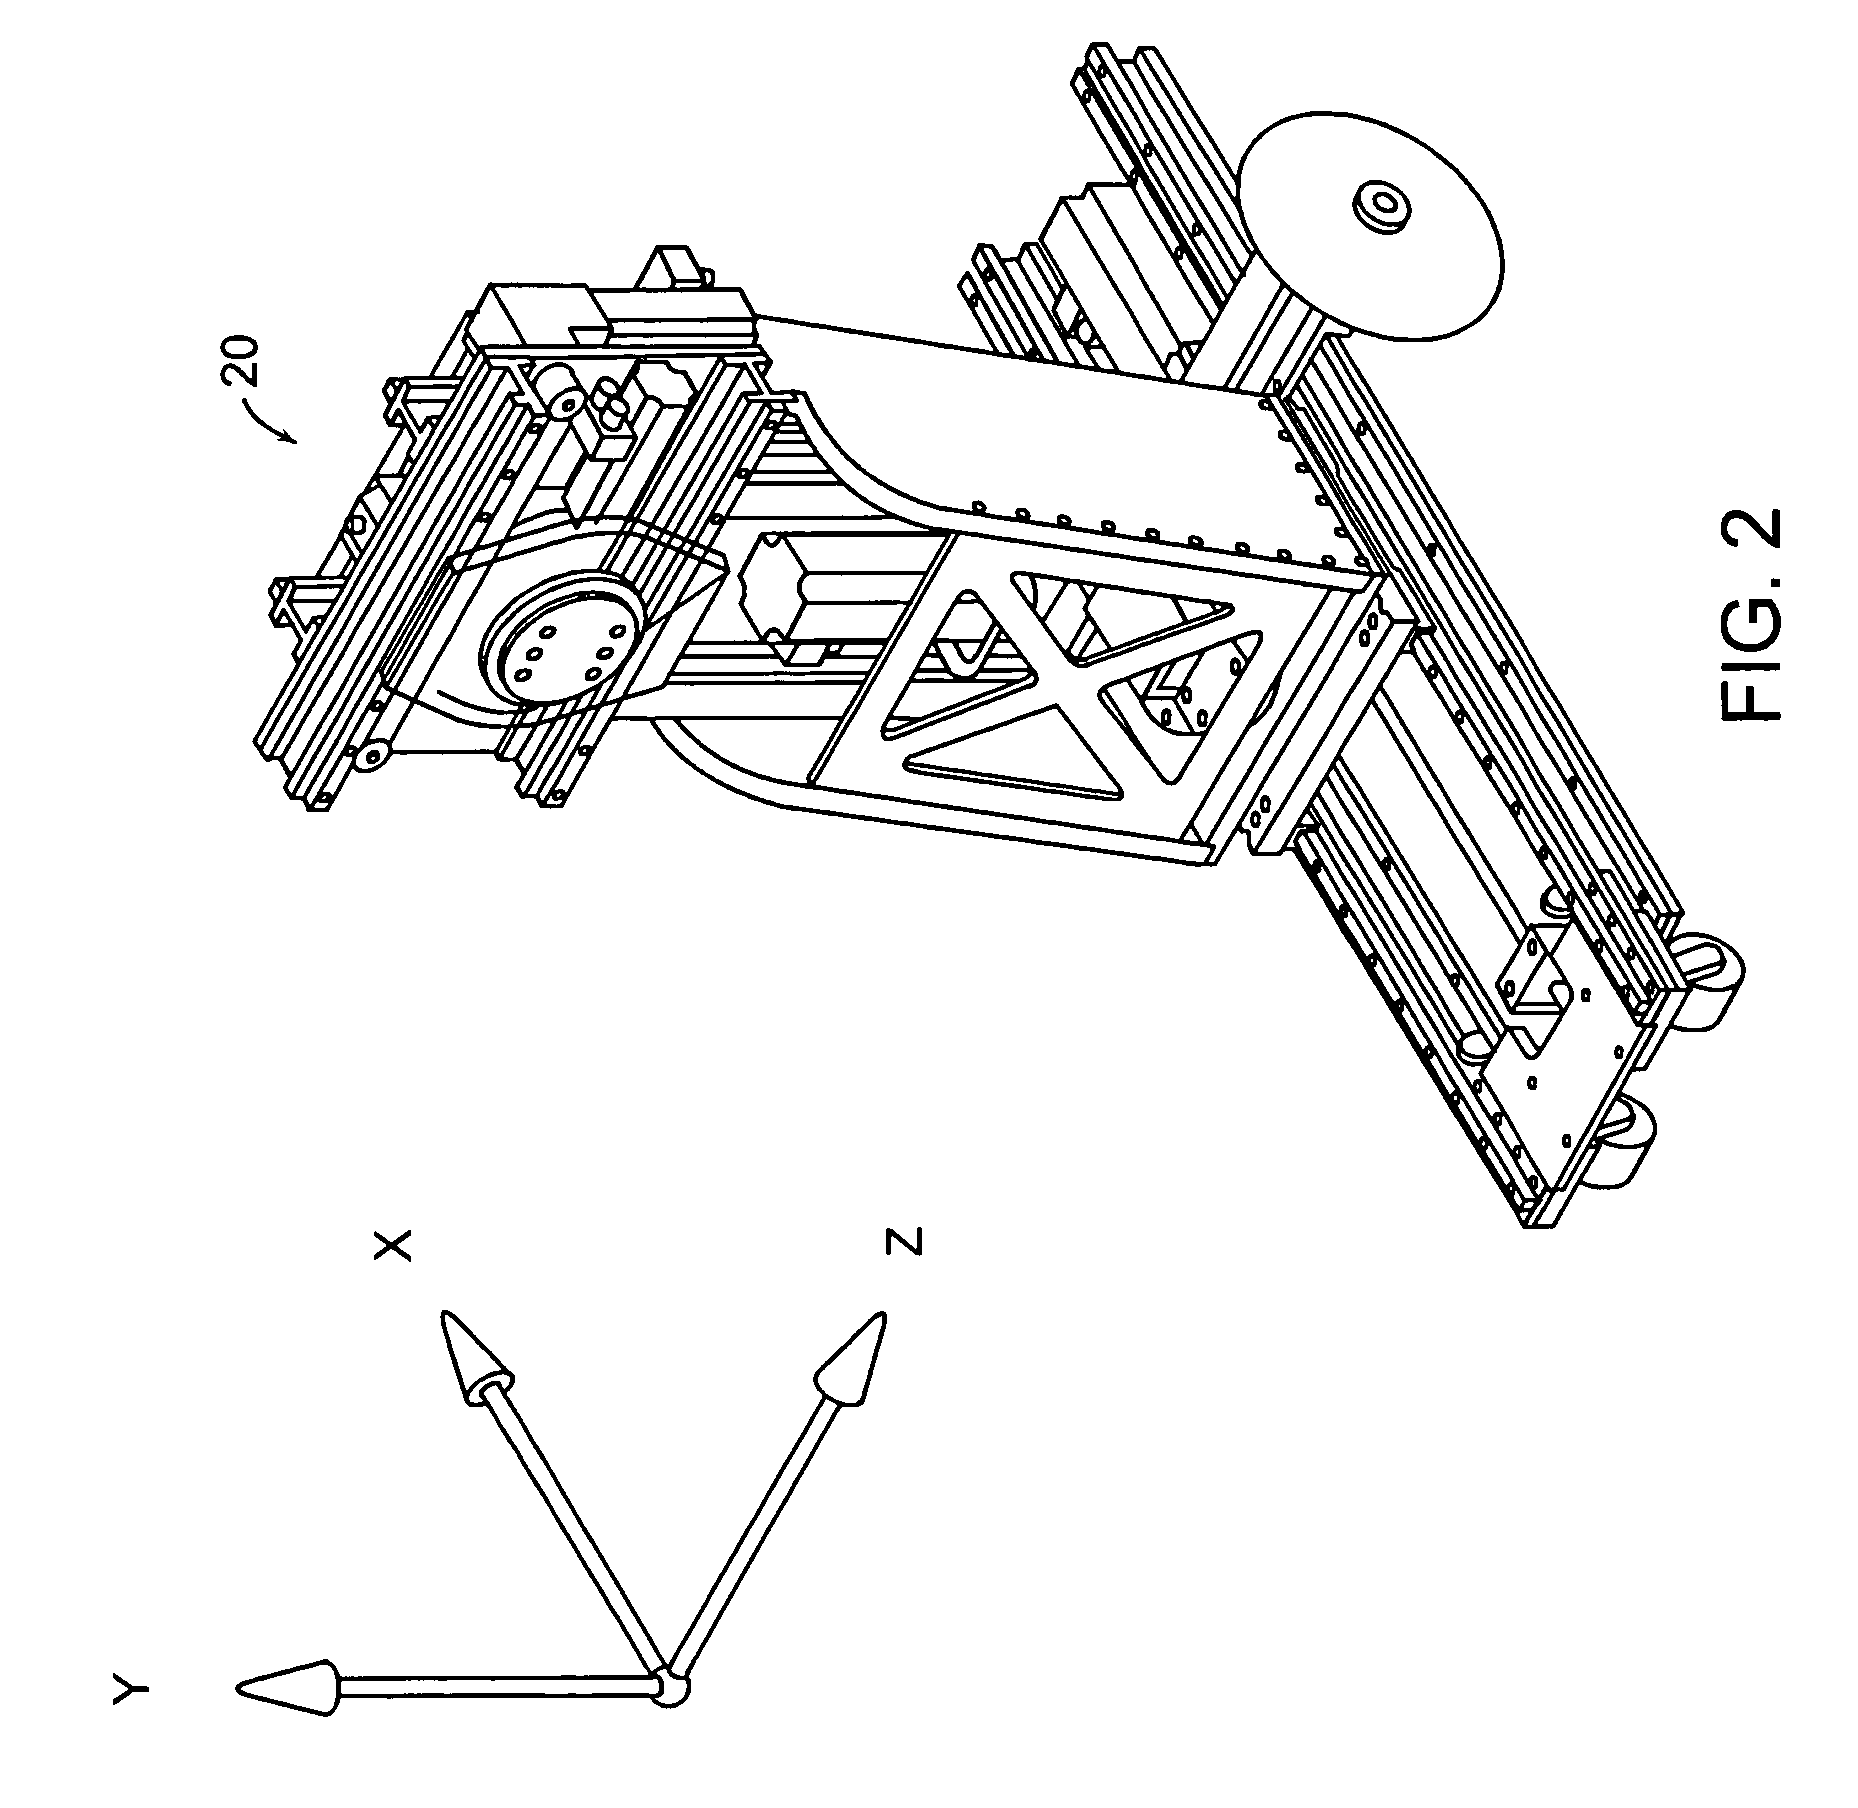 Gantry positioning apparatus for X-ray imaging